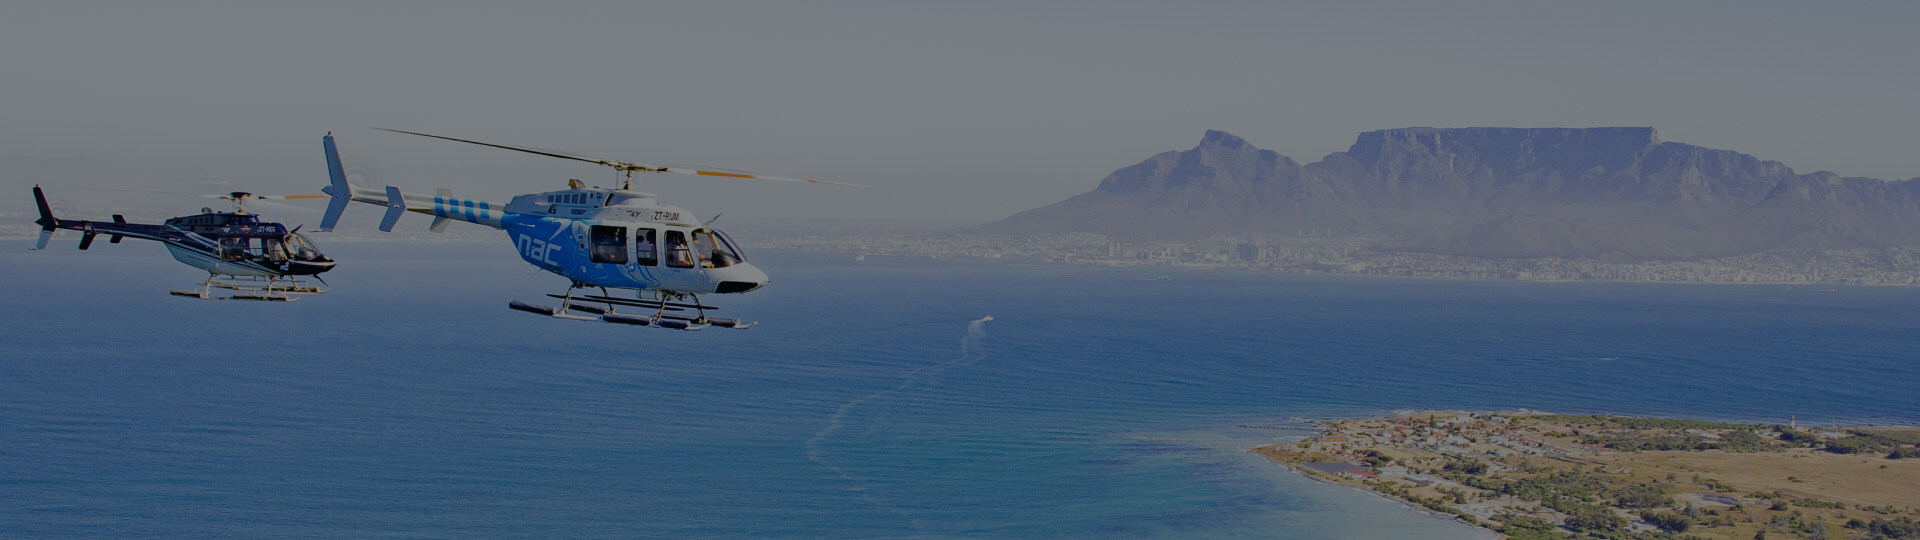 Nac Helicopter in flight over Cape Town